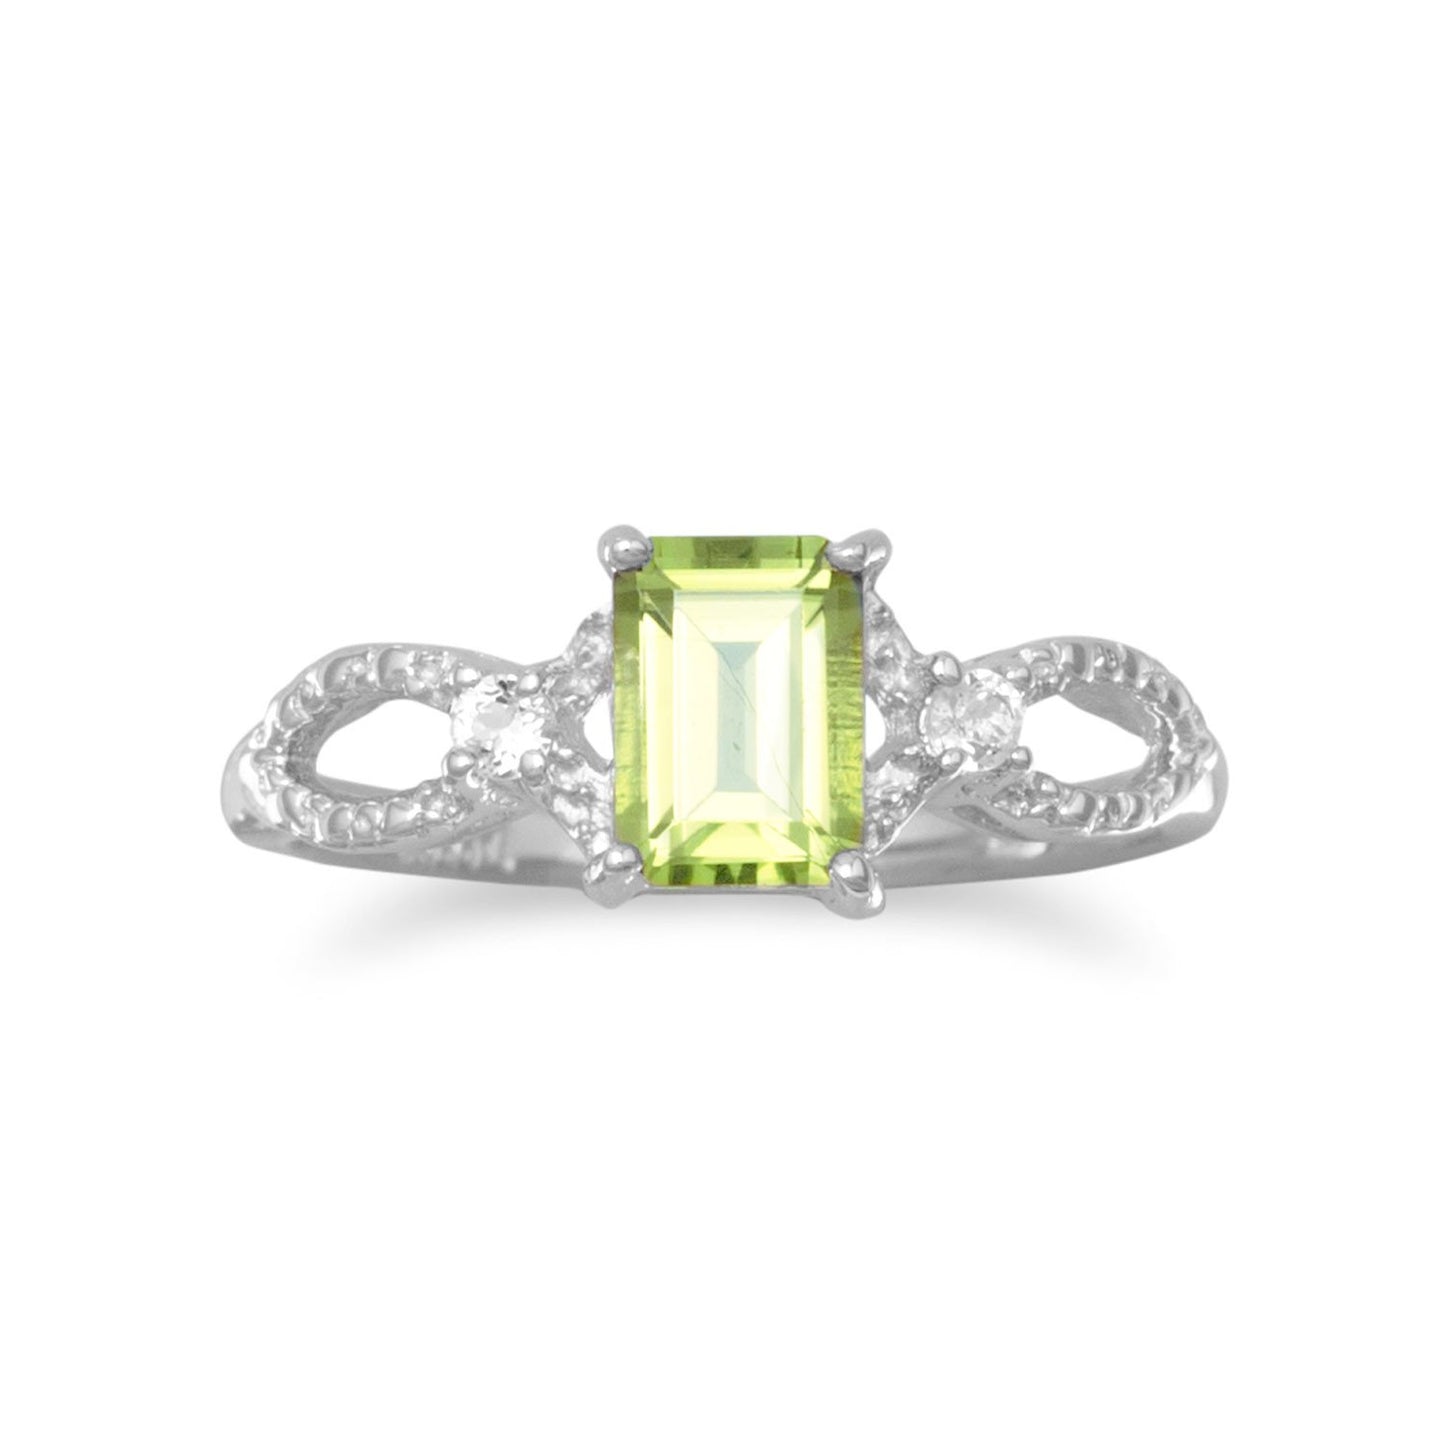 Sterling Silver Peridot and White Topaz Ring